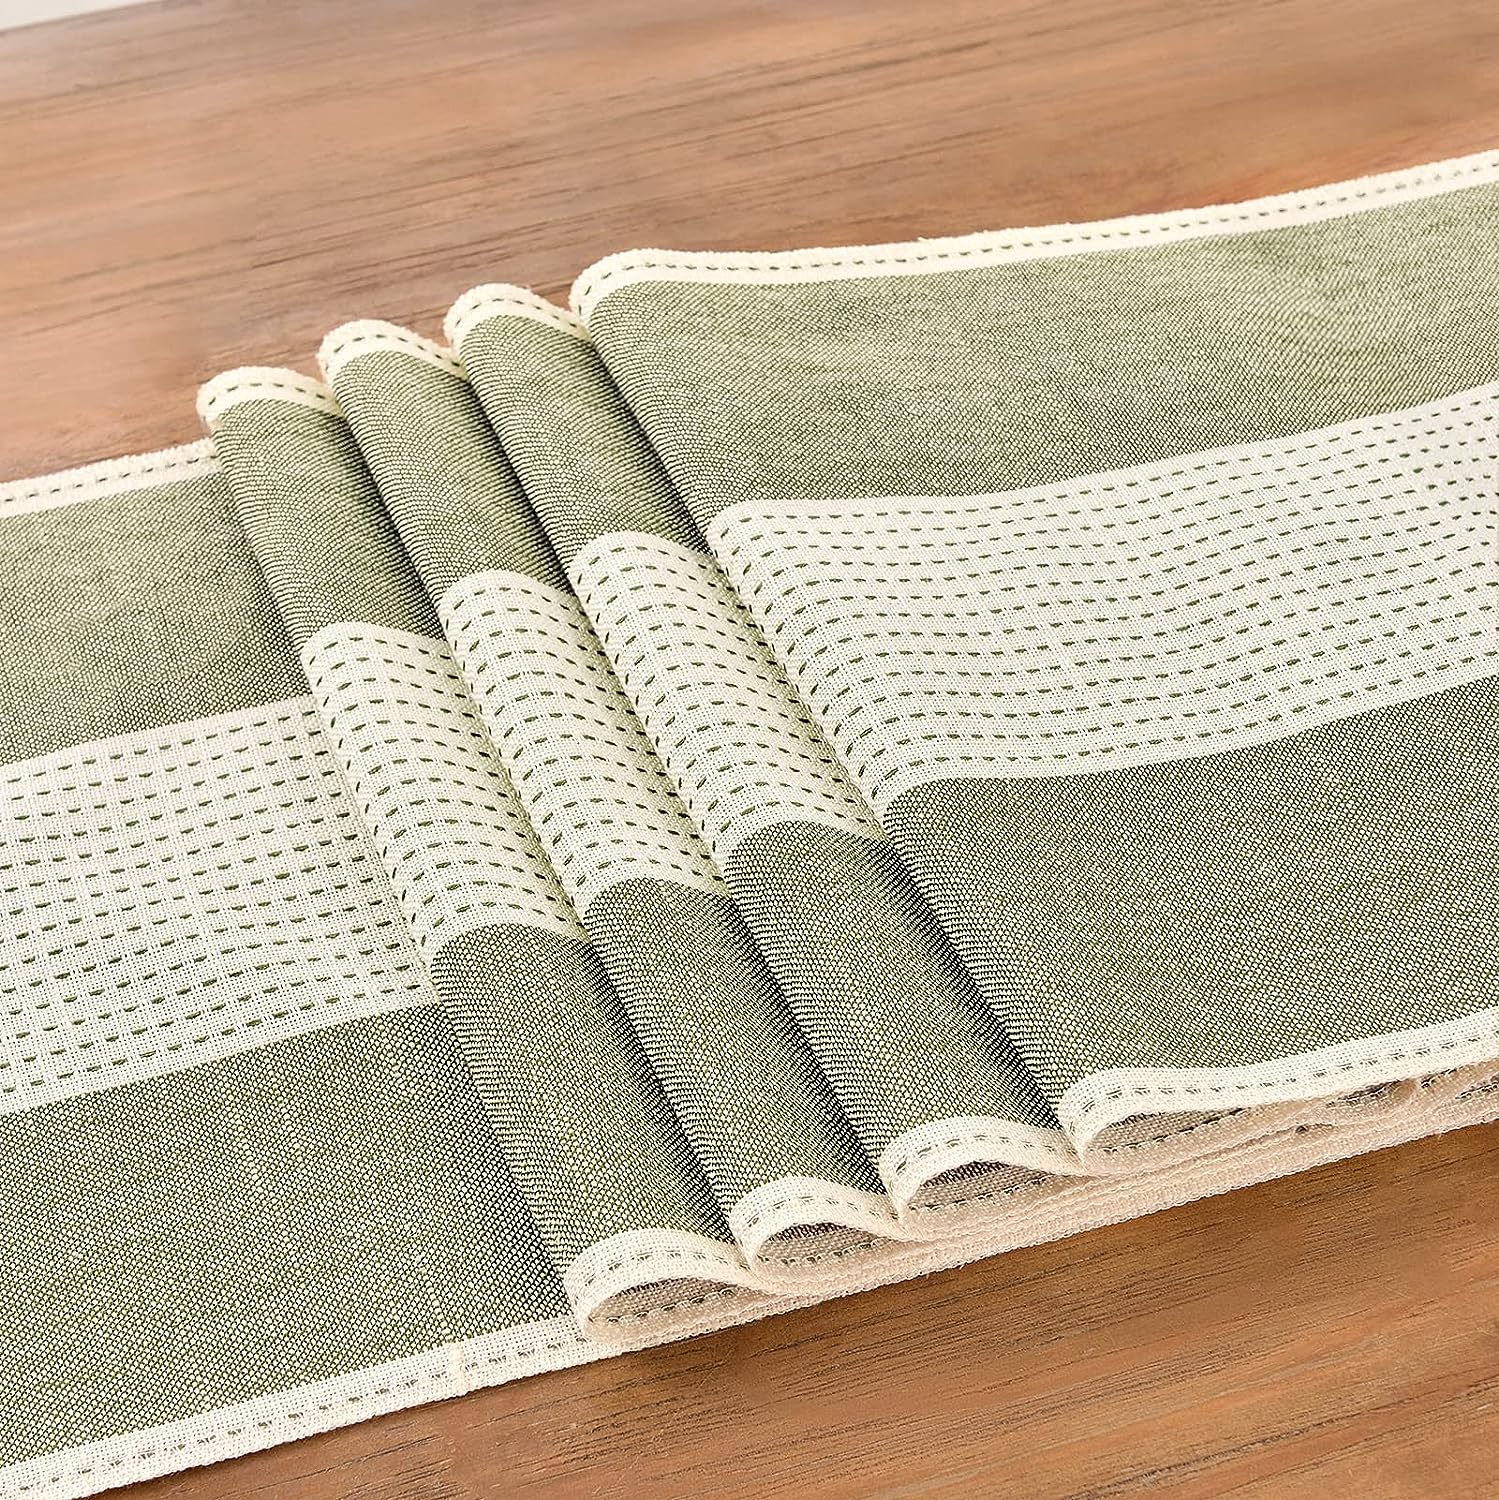 Wracra Cotton Linen Sage Green Table Runner 180cm Long with Hand-tassels, Macrame Table Runner for Holiday Parties and Everyday Use(Sage Green, 180cm) 2